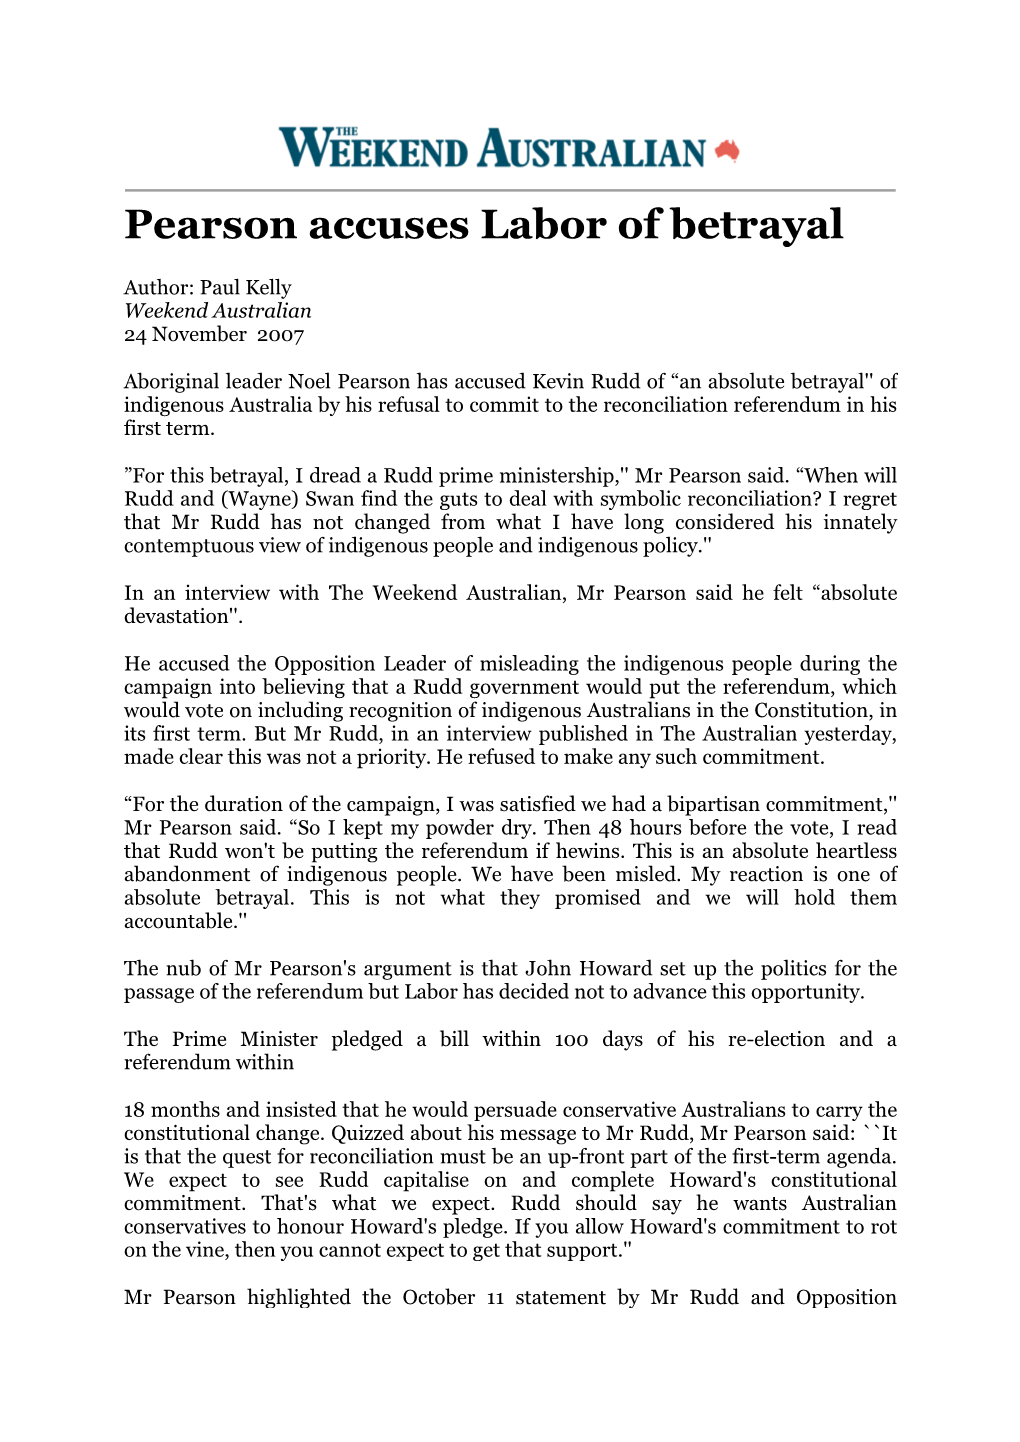 Pearson Accuses Labor of Betrayal